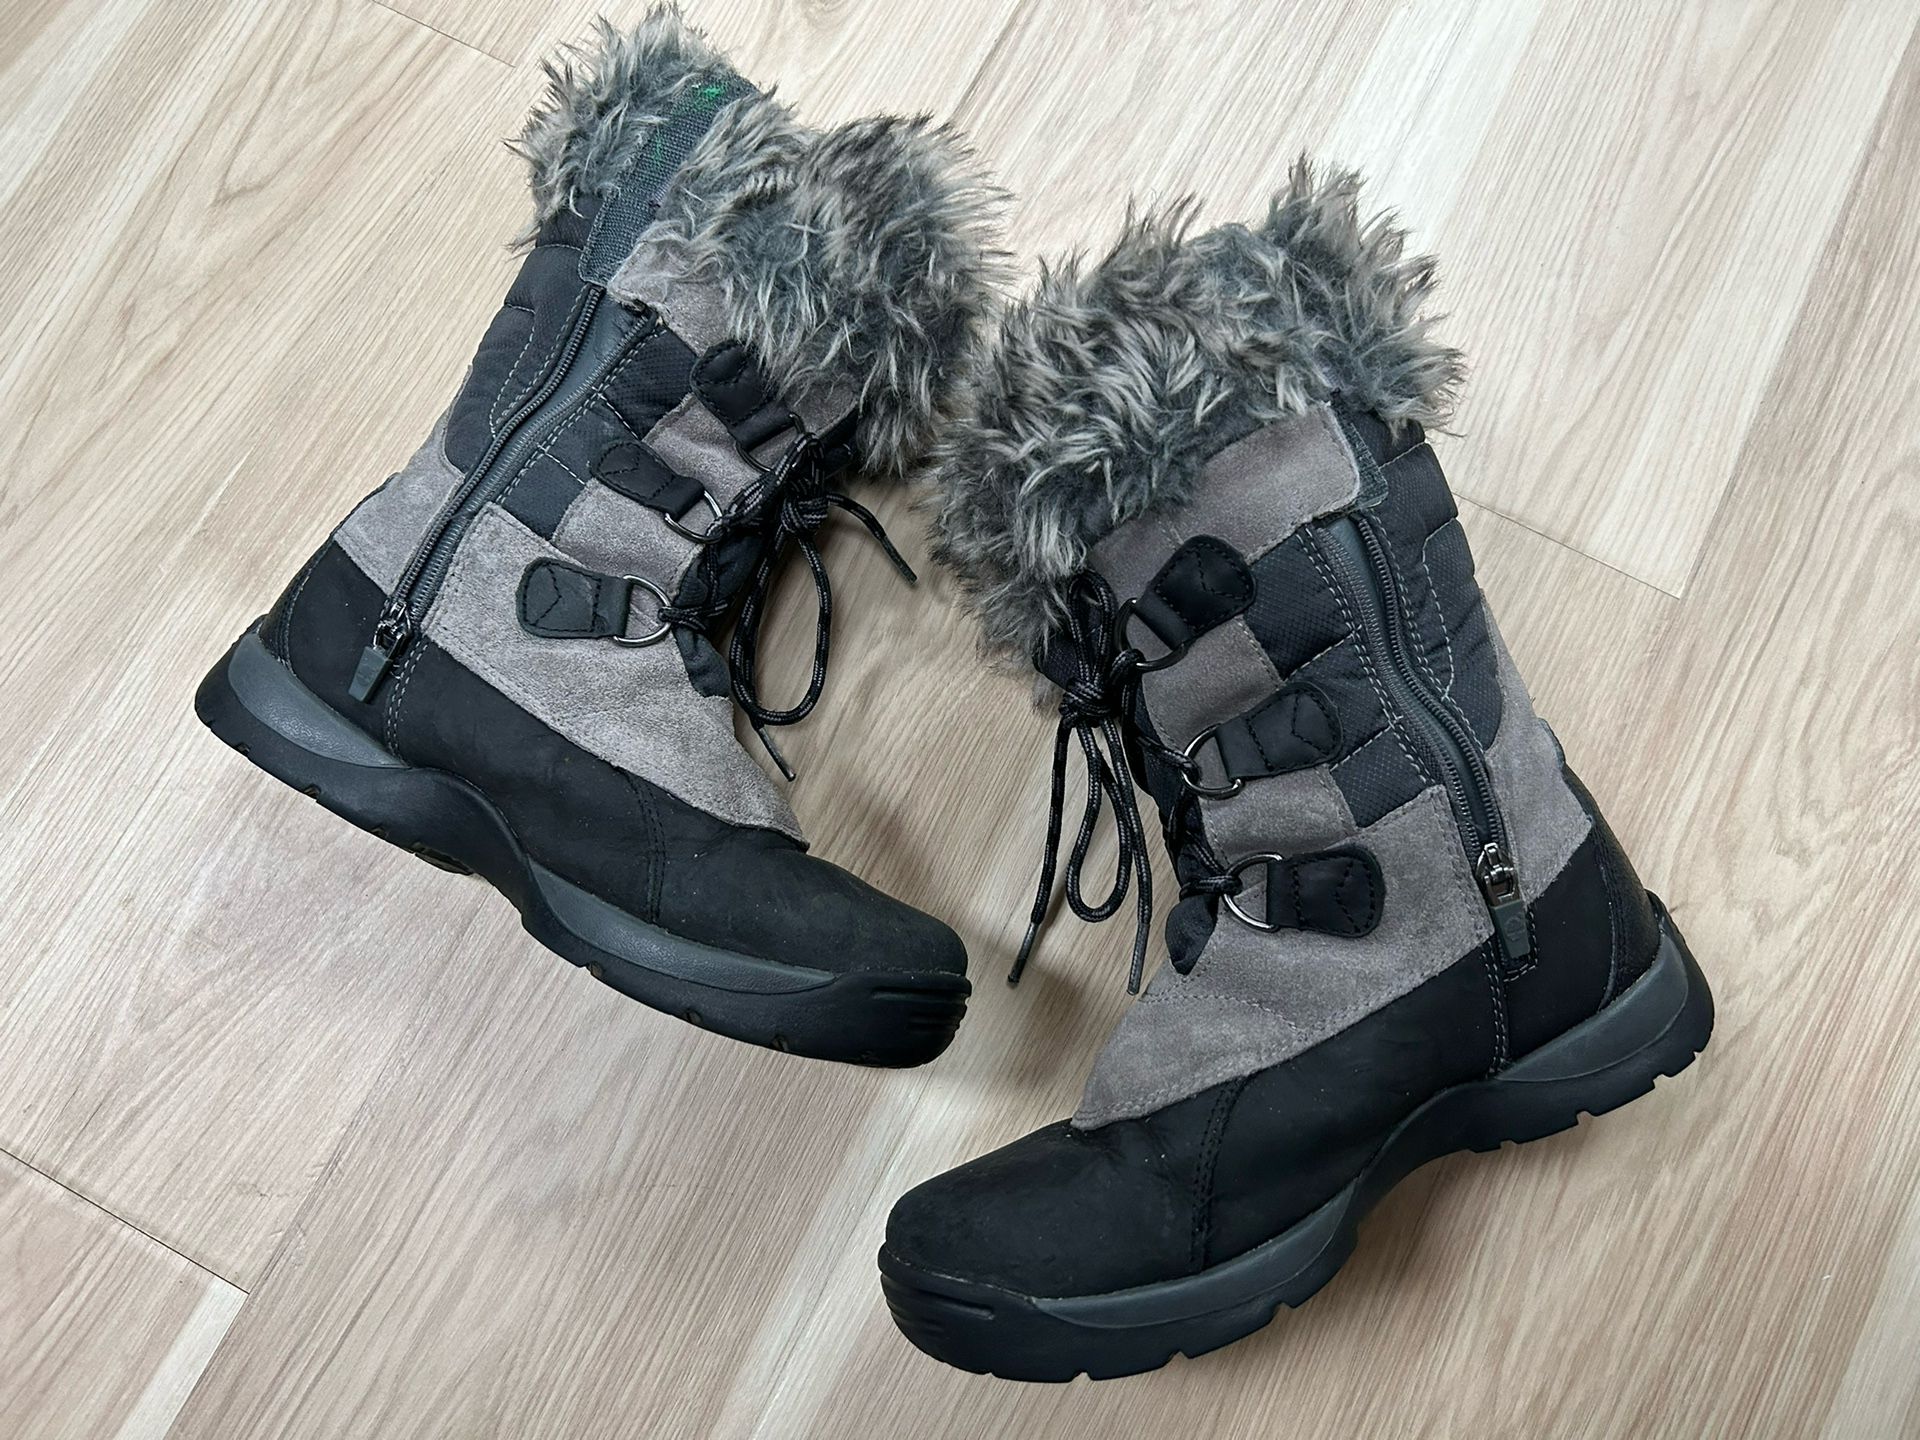 Timberland Kid's Black Faux Fur Lined Winter Boots Girl's Size 4